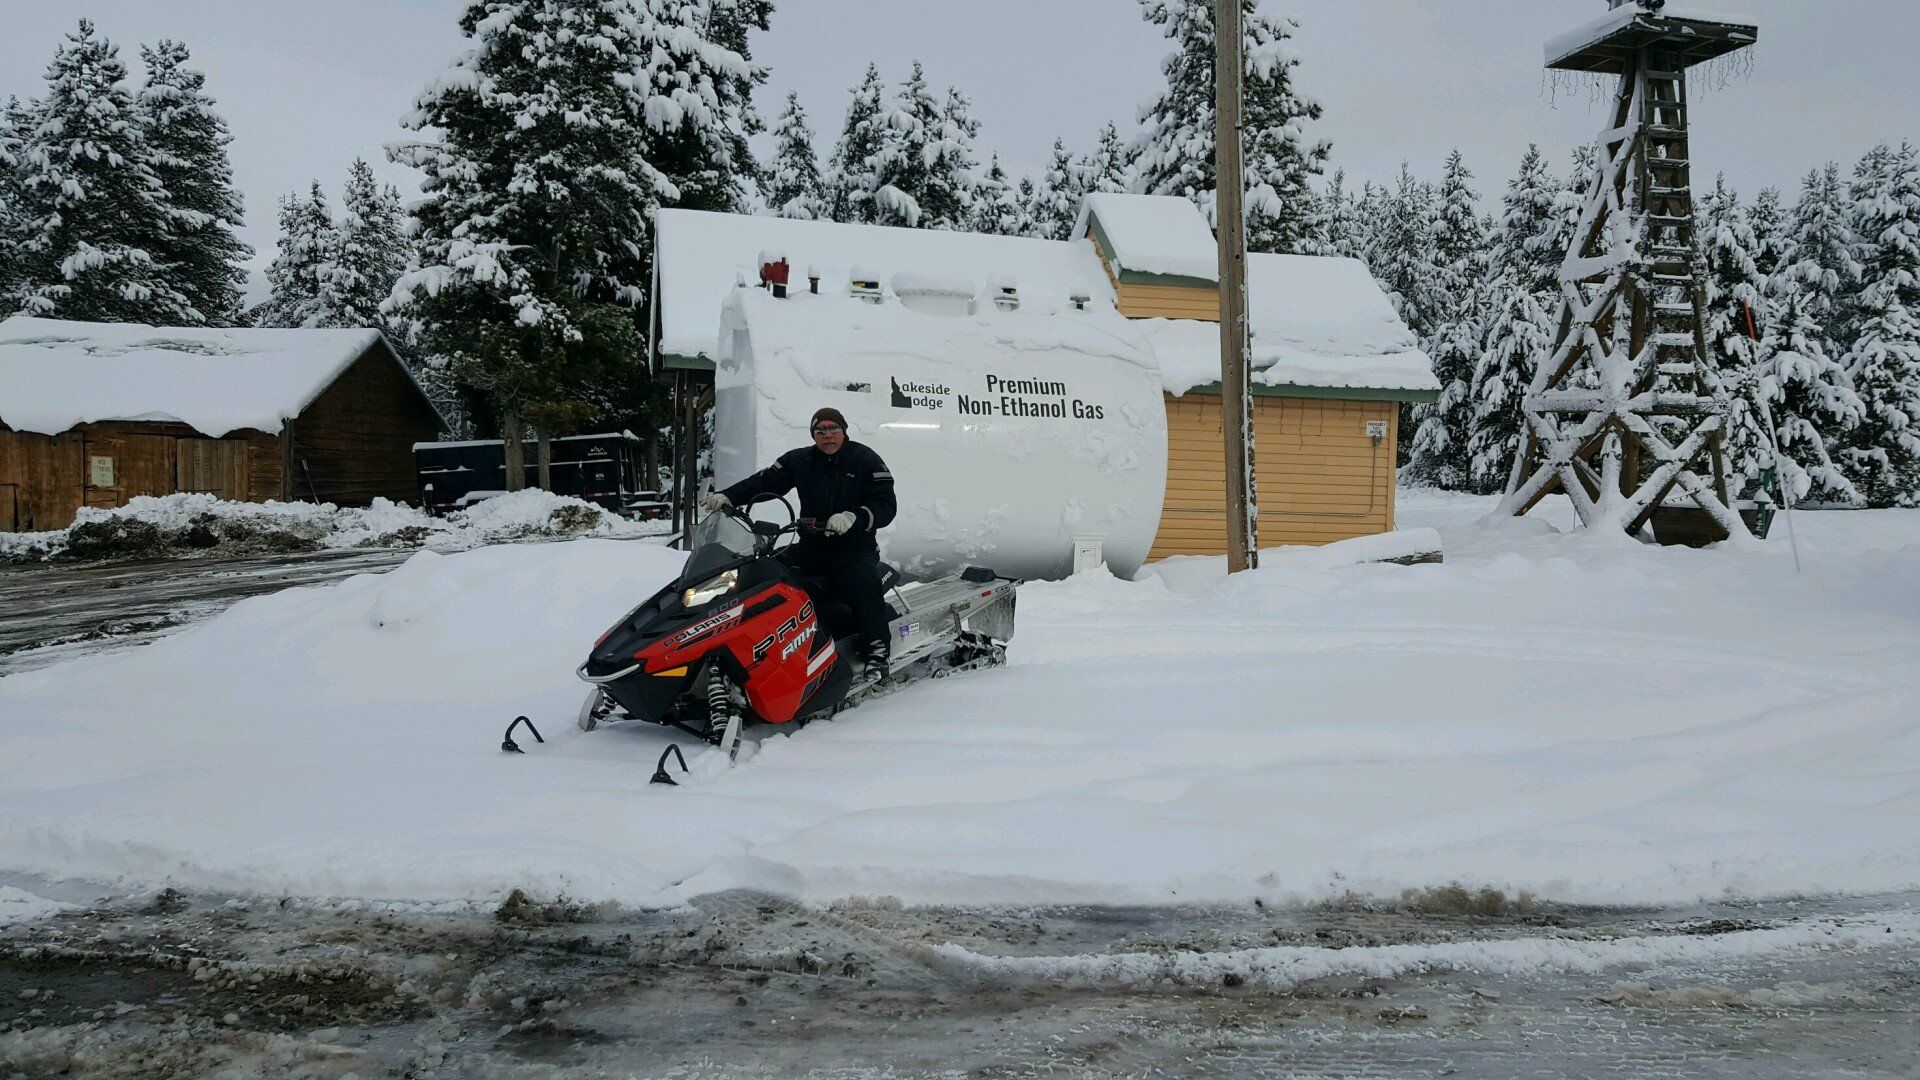 A man sitting on a red snowmobile